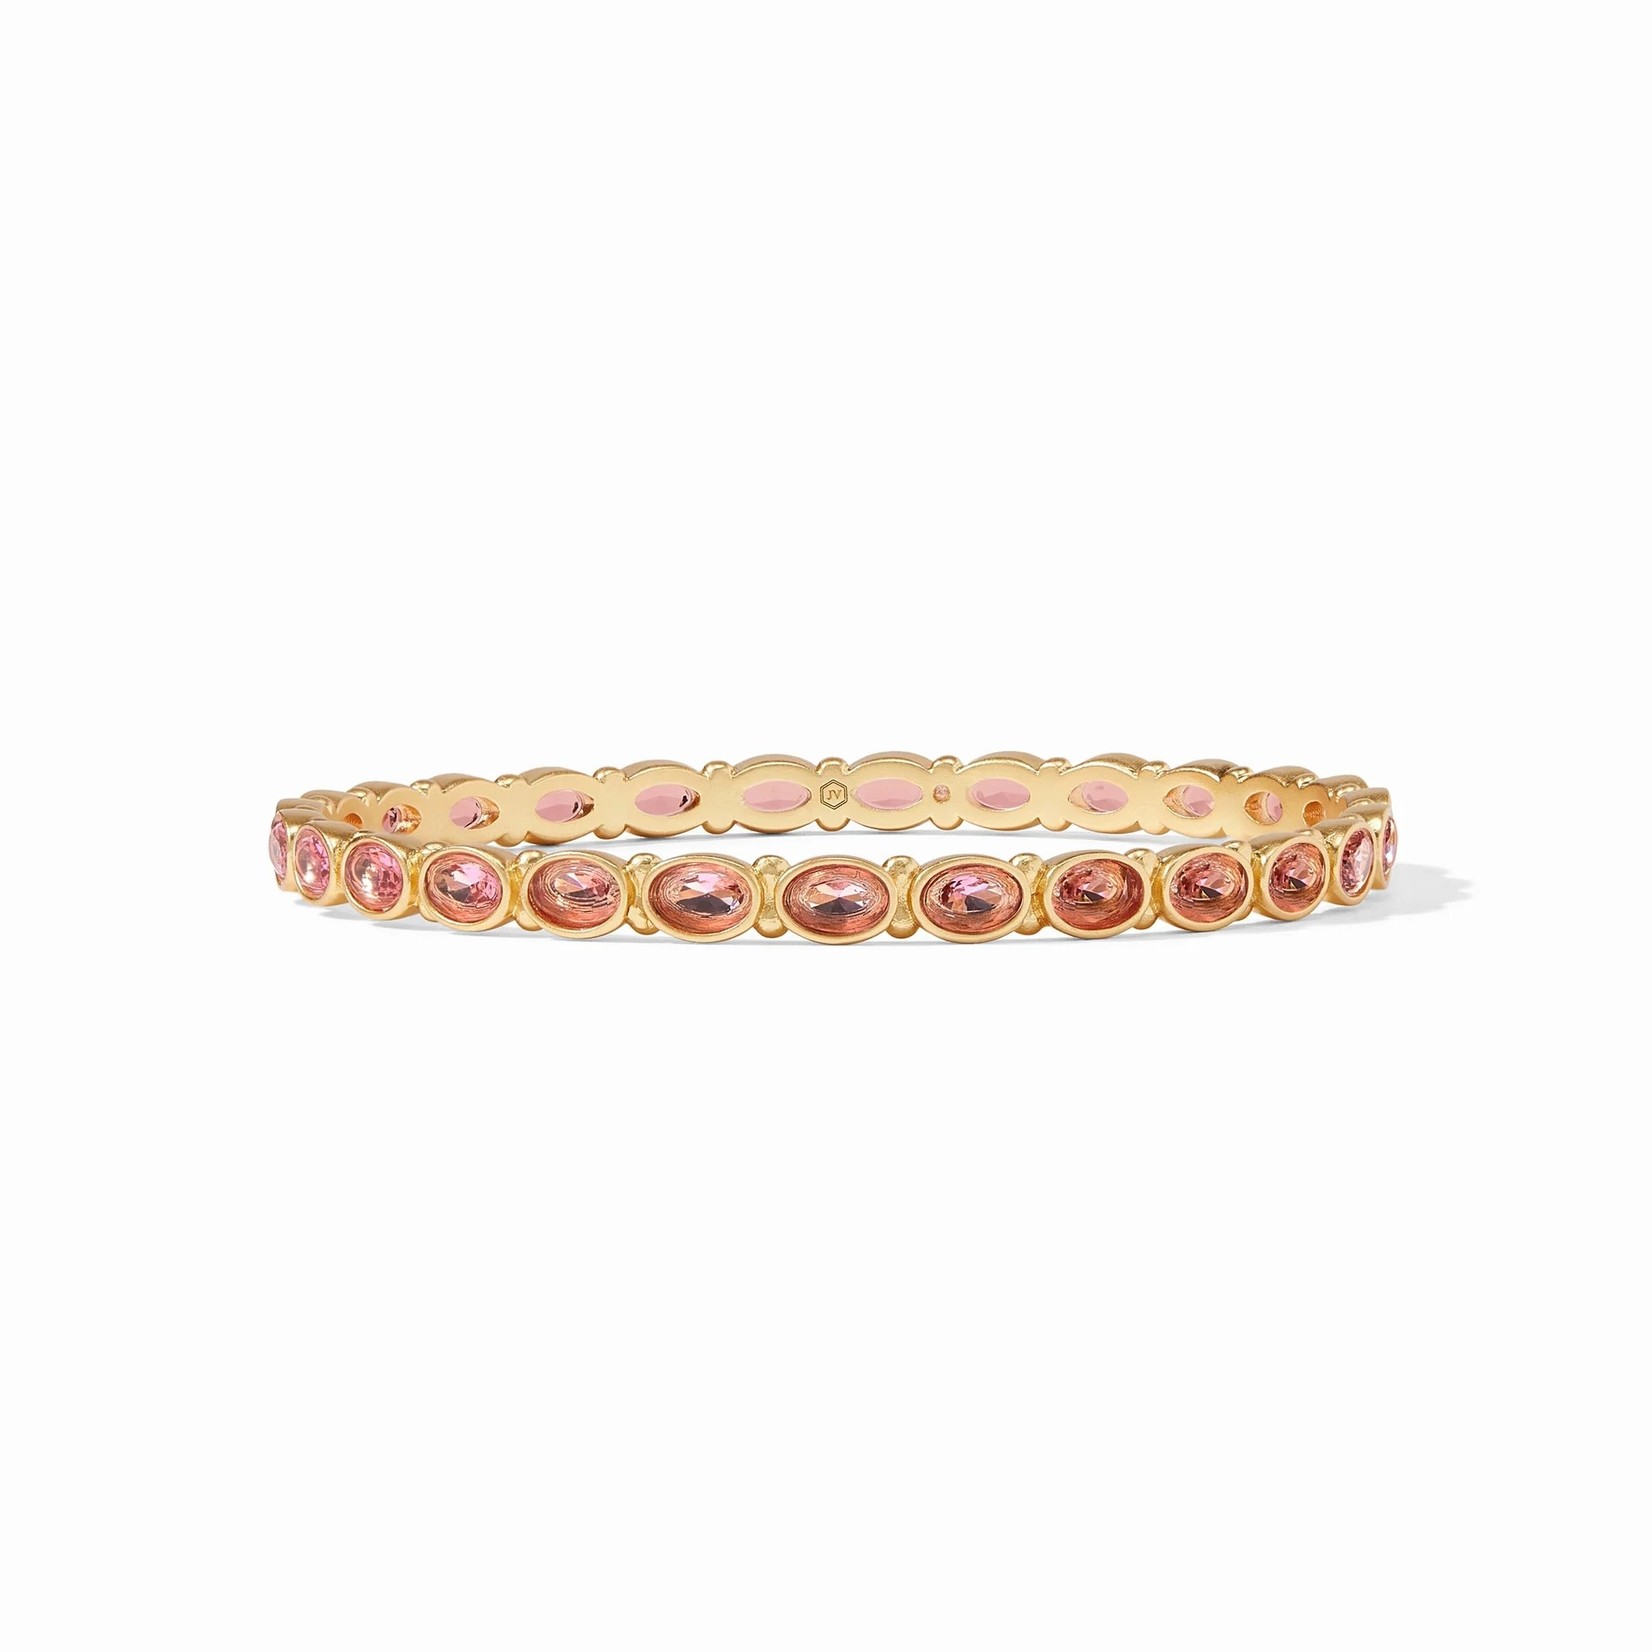 MYKONOS BANGLE GOLD CLEAR CORAL